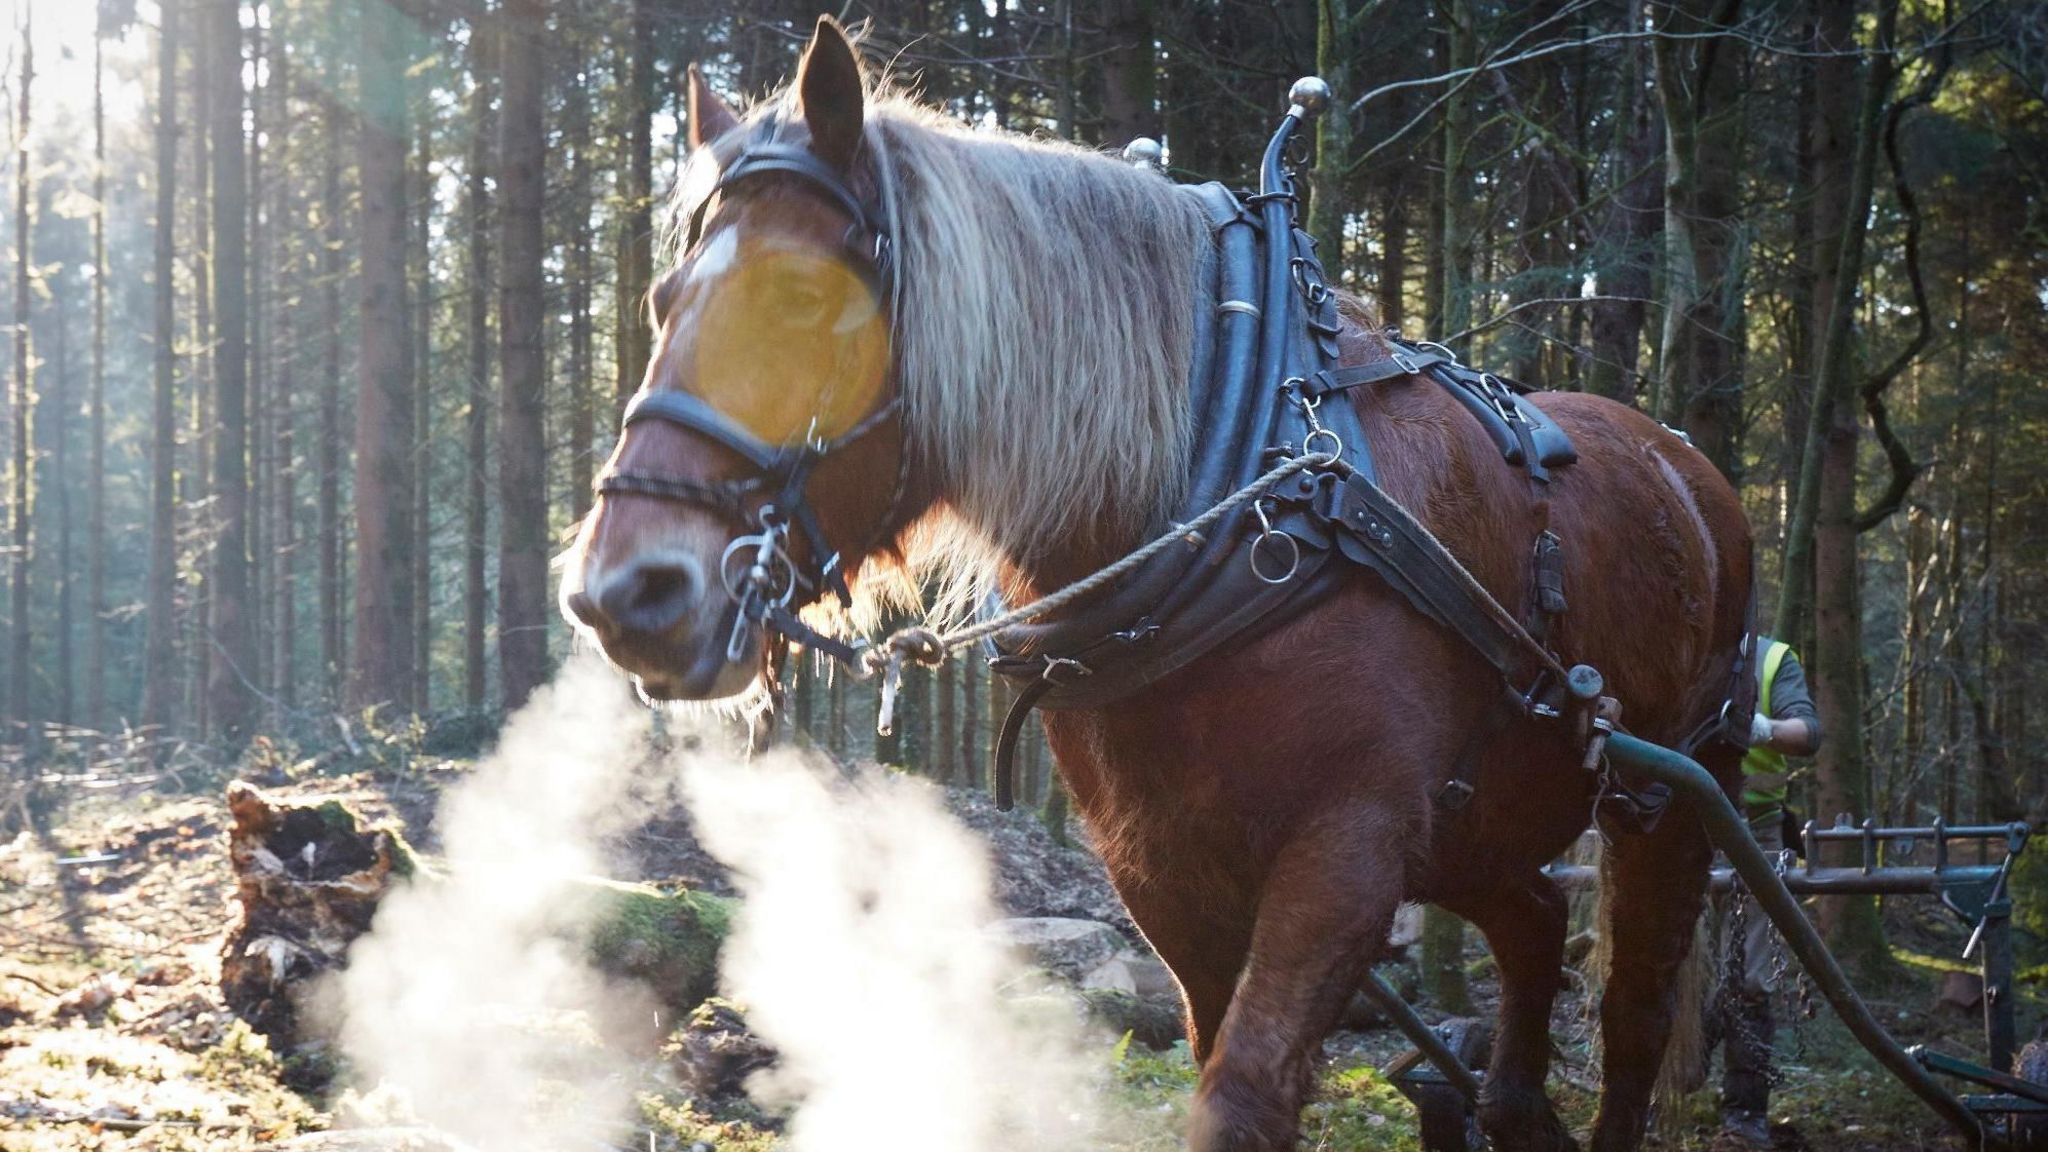 Horse in a forest breathing steam as it drags trees